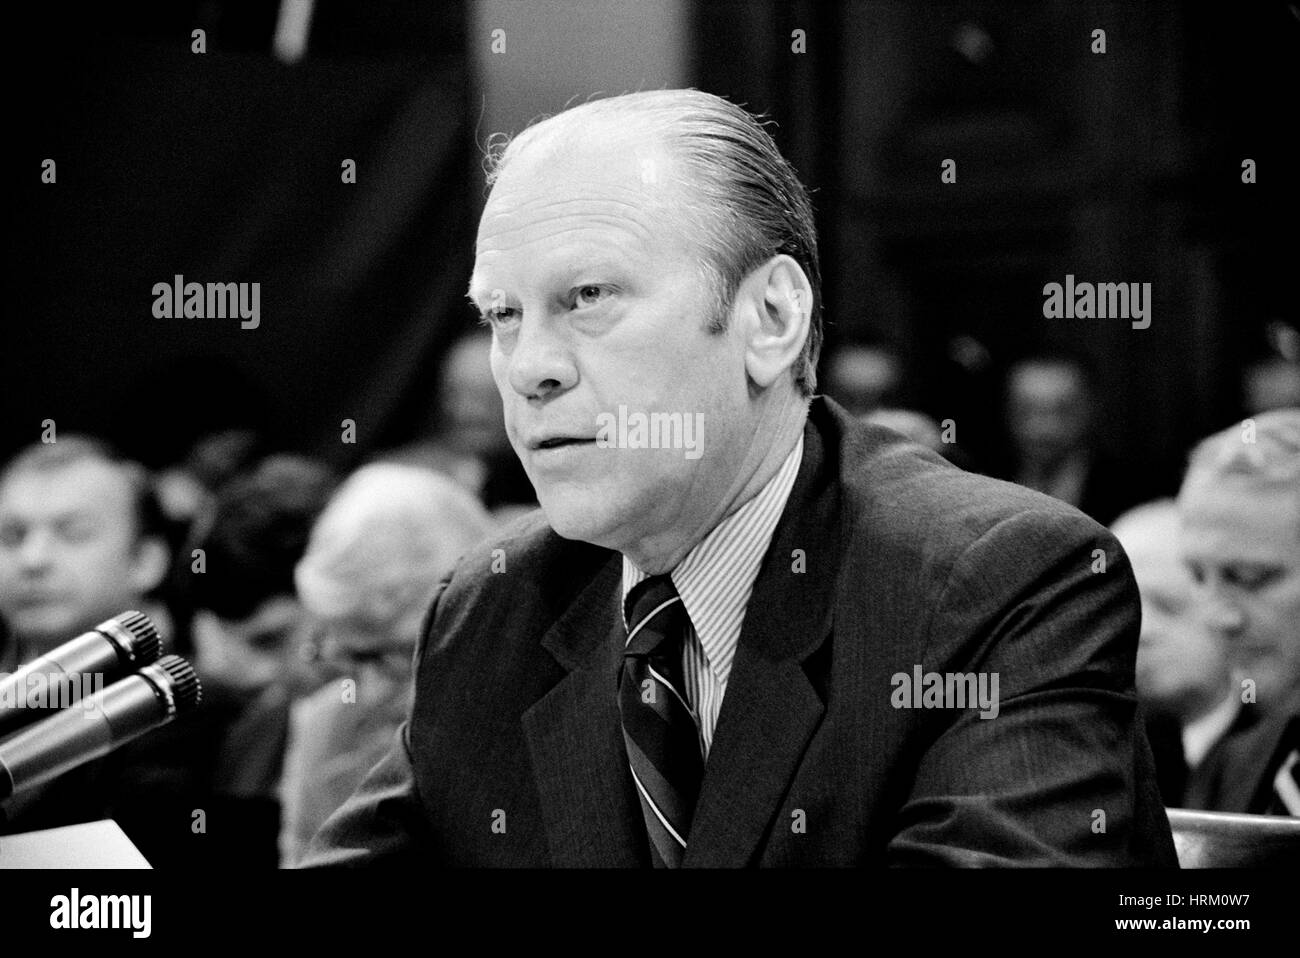 GERALD FORD (1913-2006) speaking at a House Judiciary hearing about his issue of a pardon to Richard Nixon on 17 October 1974. Photo: Thomas O'Halloran/Library of Congress Stock Photo